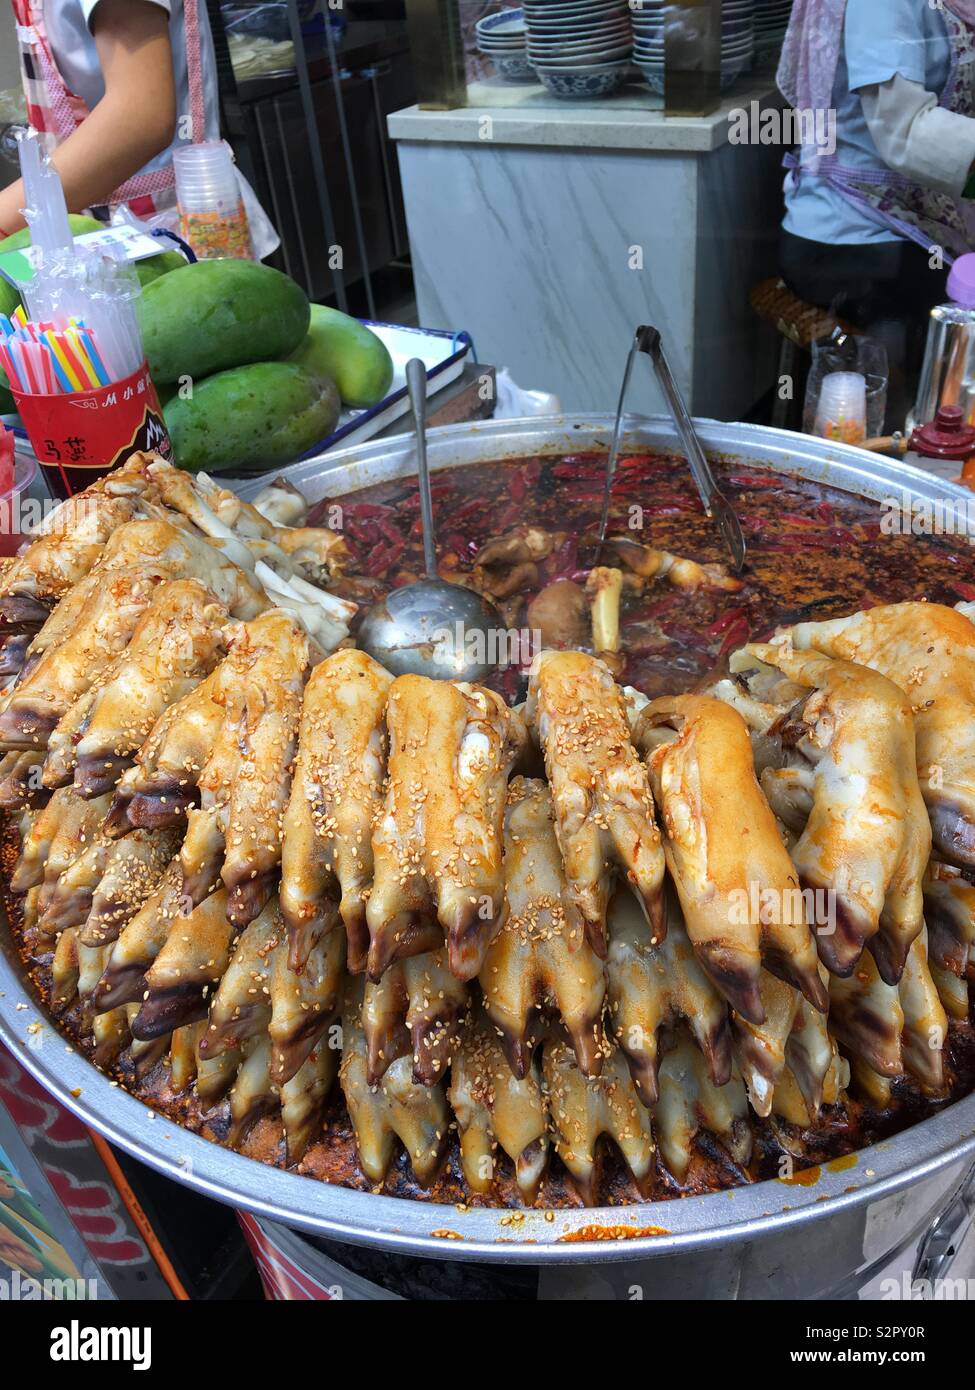 Lamb feet for dinner in Xian, China Stock Photo